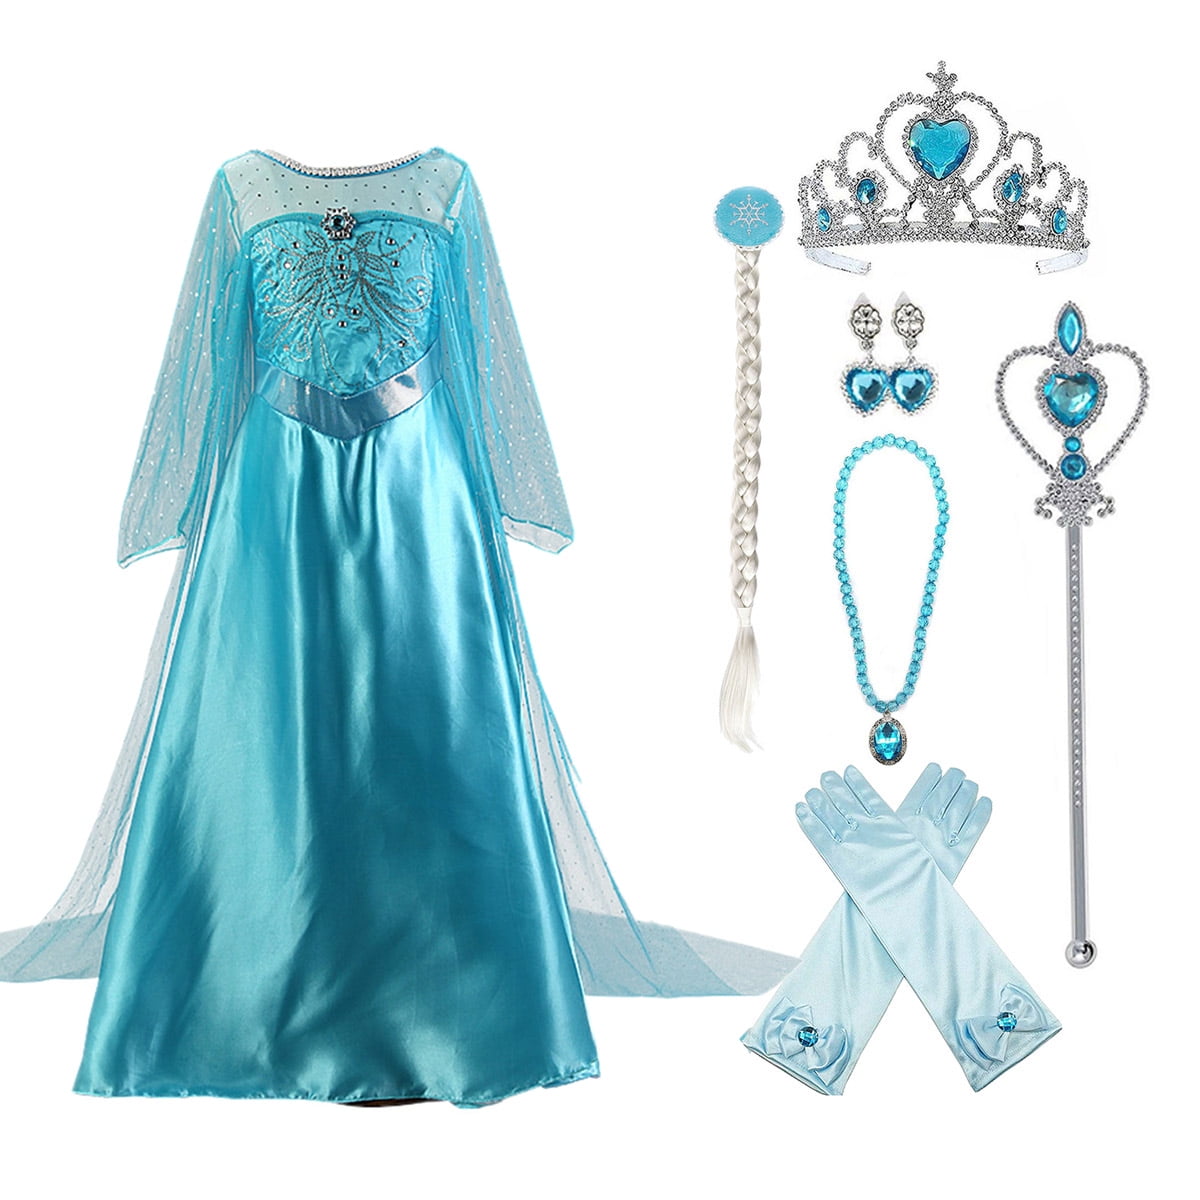 princess party dress for adults